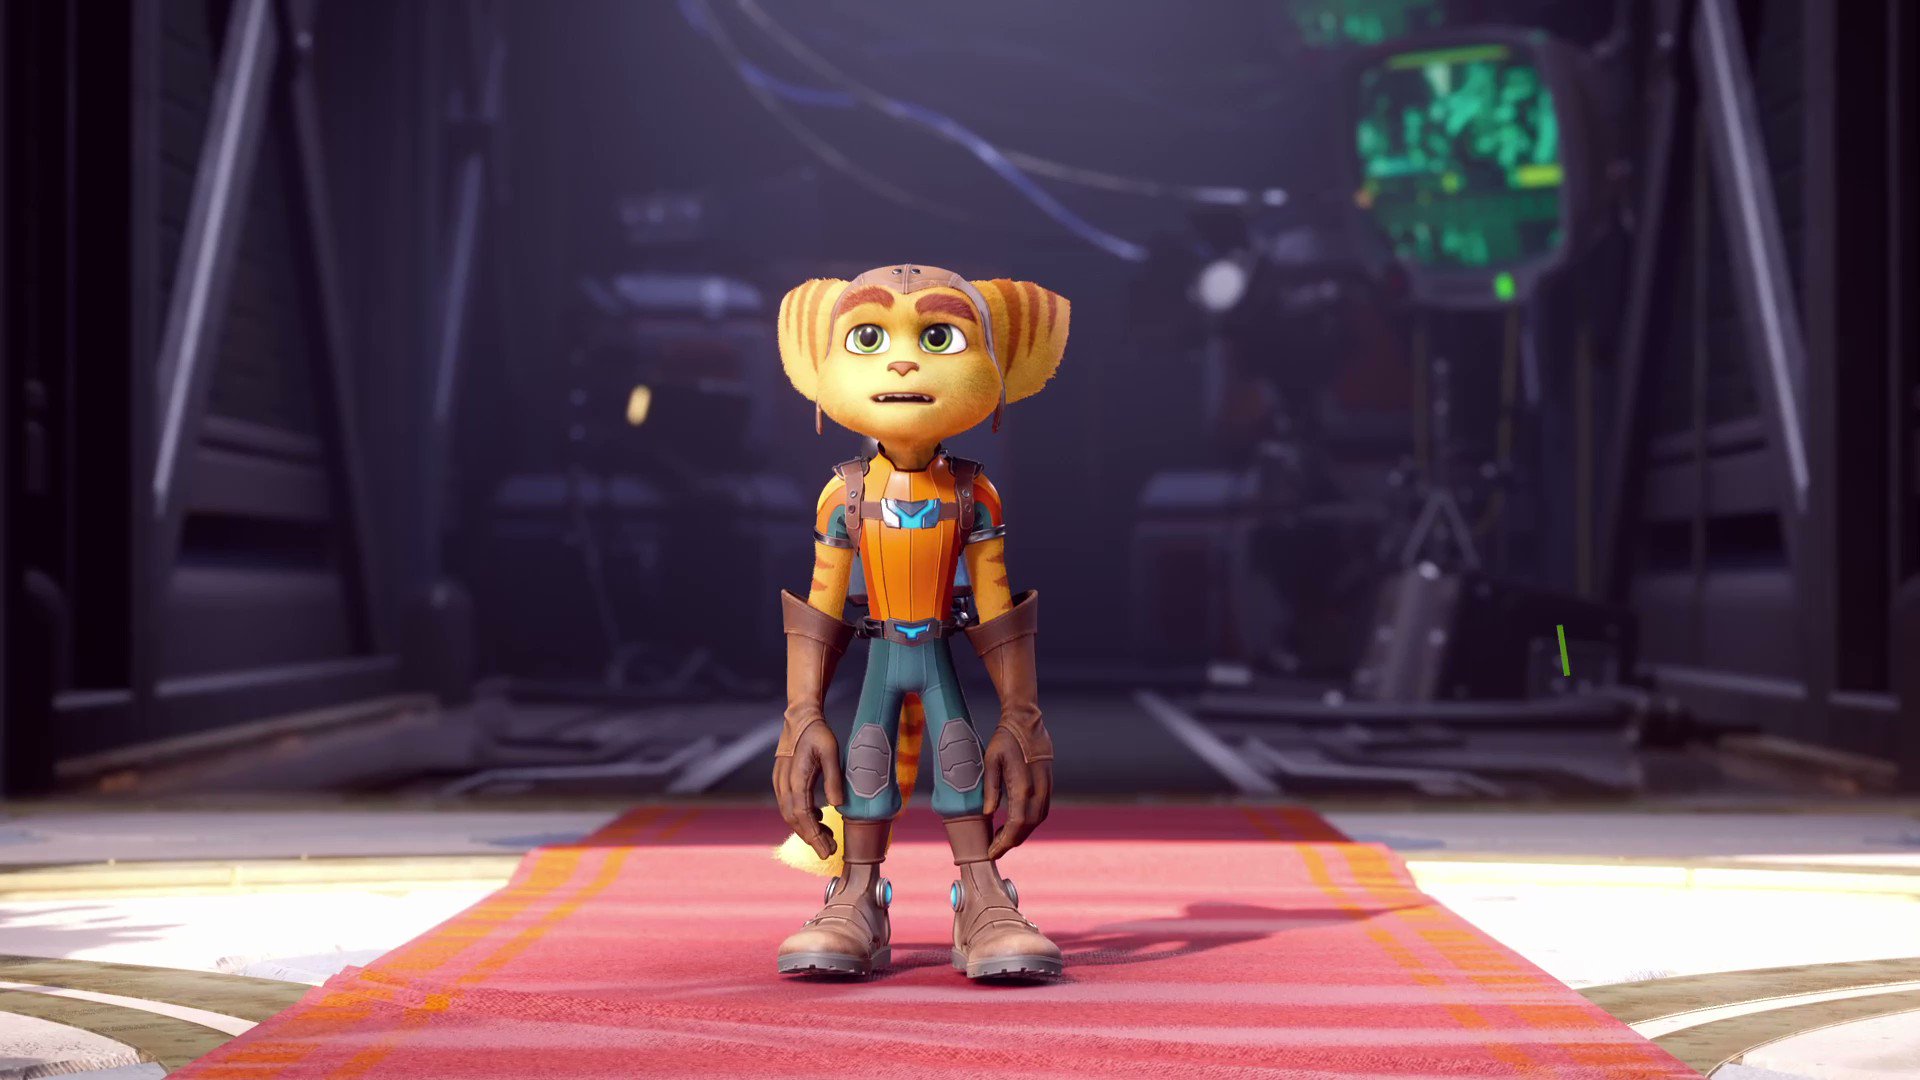 It Takes Two Gets GOTY at DICE Awards; Ratchet & Clank Wins Big